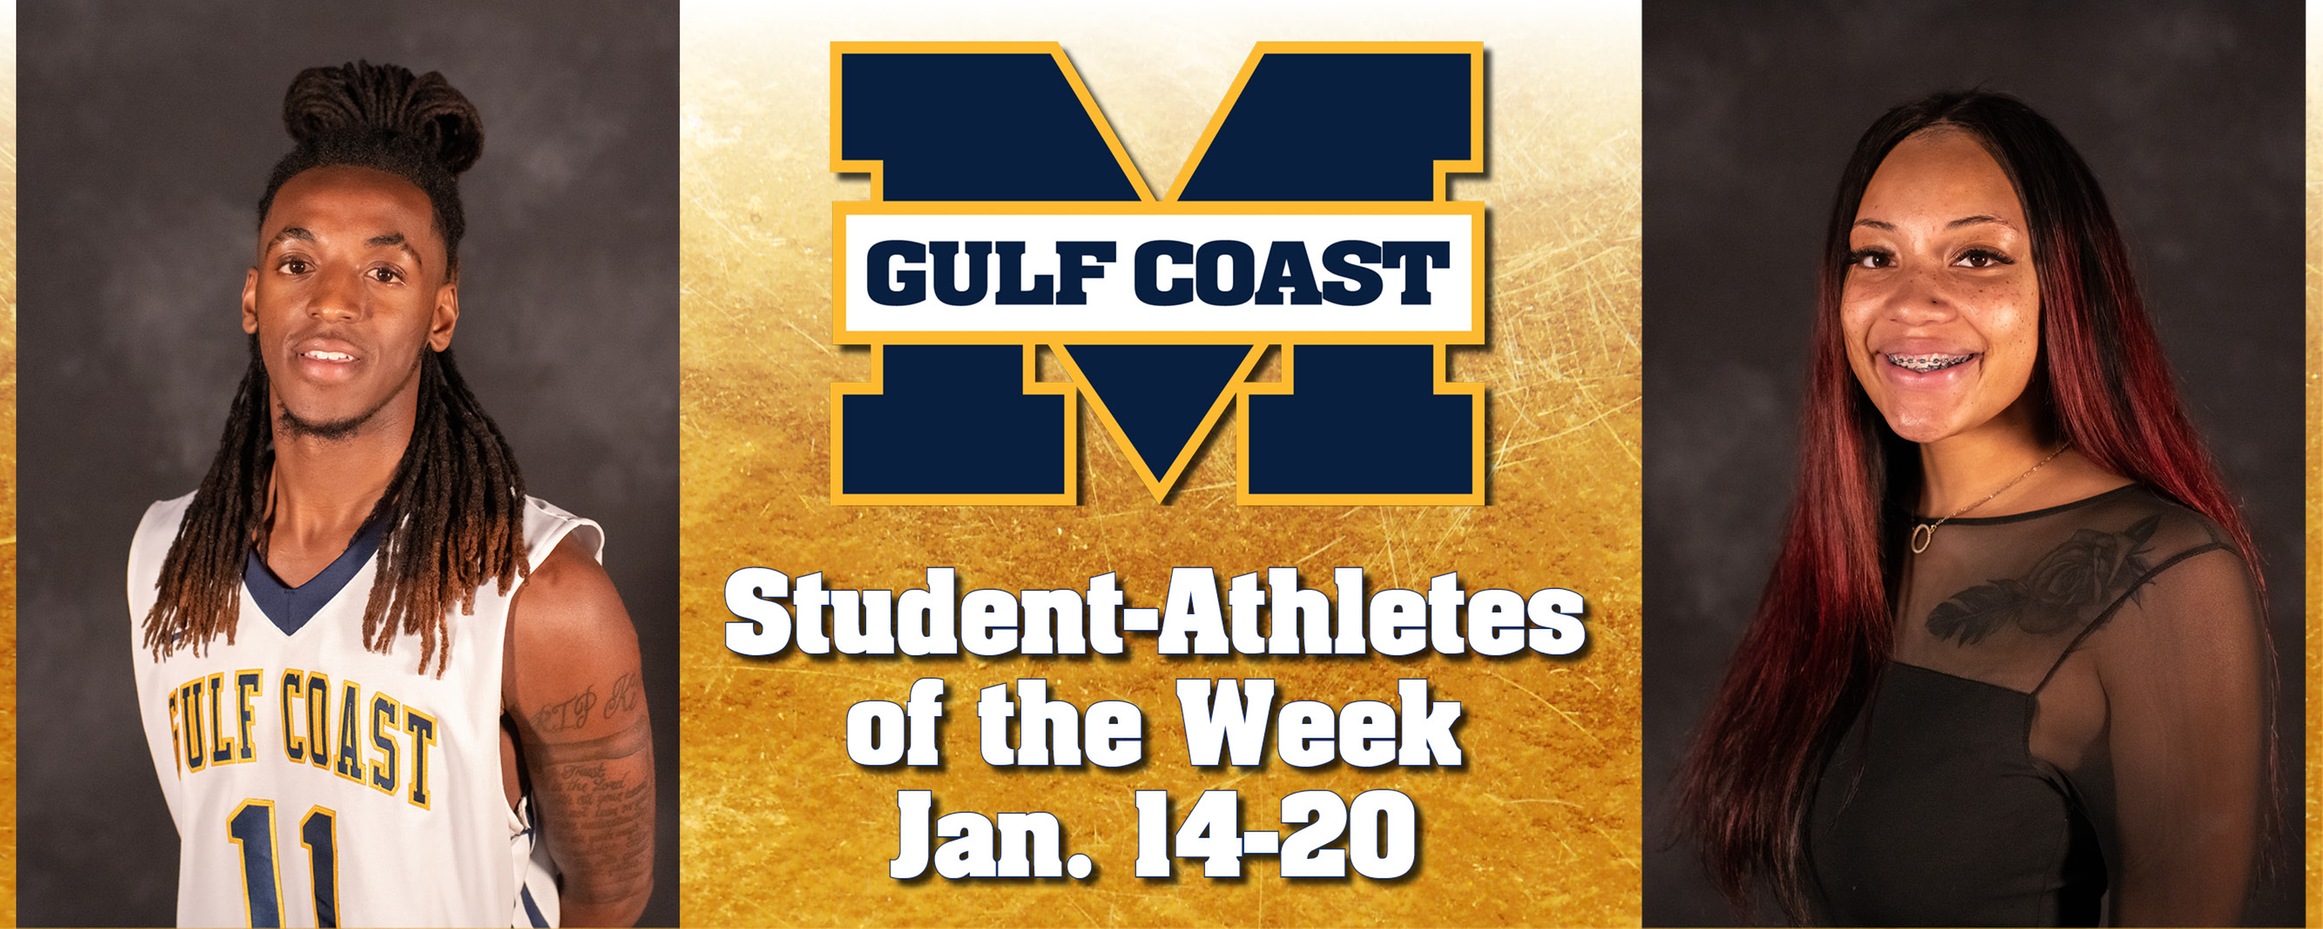 Spivery, White named MGCCC Student-Athletes of the Week